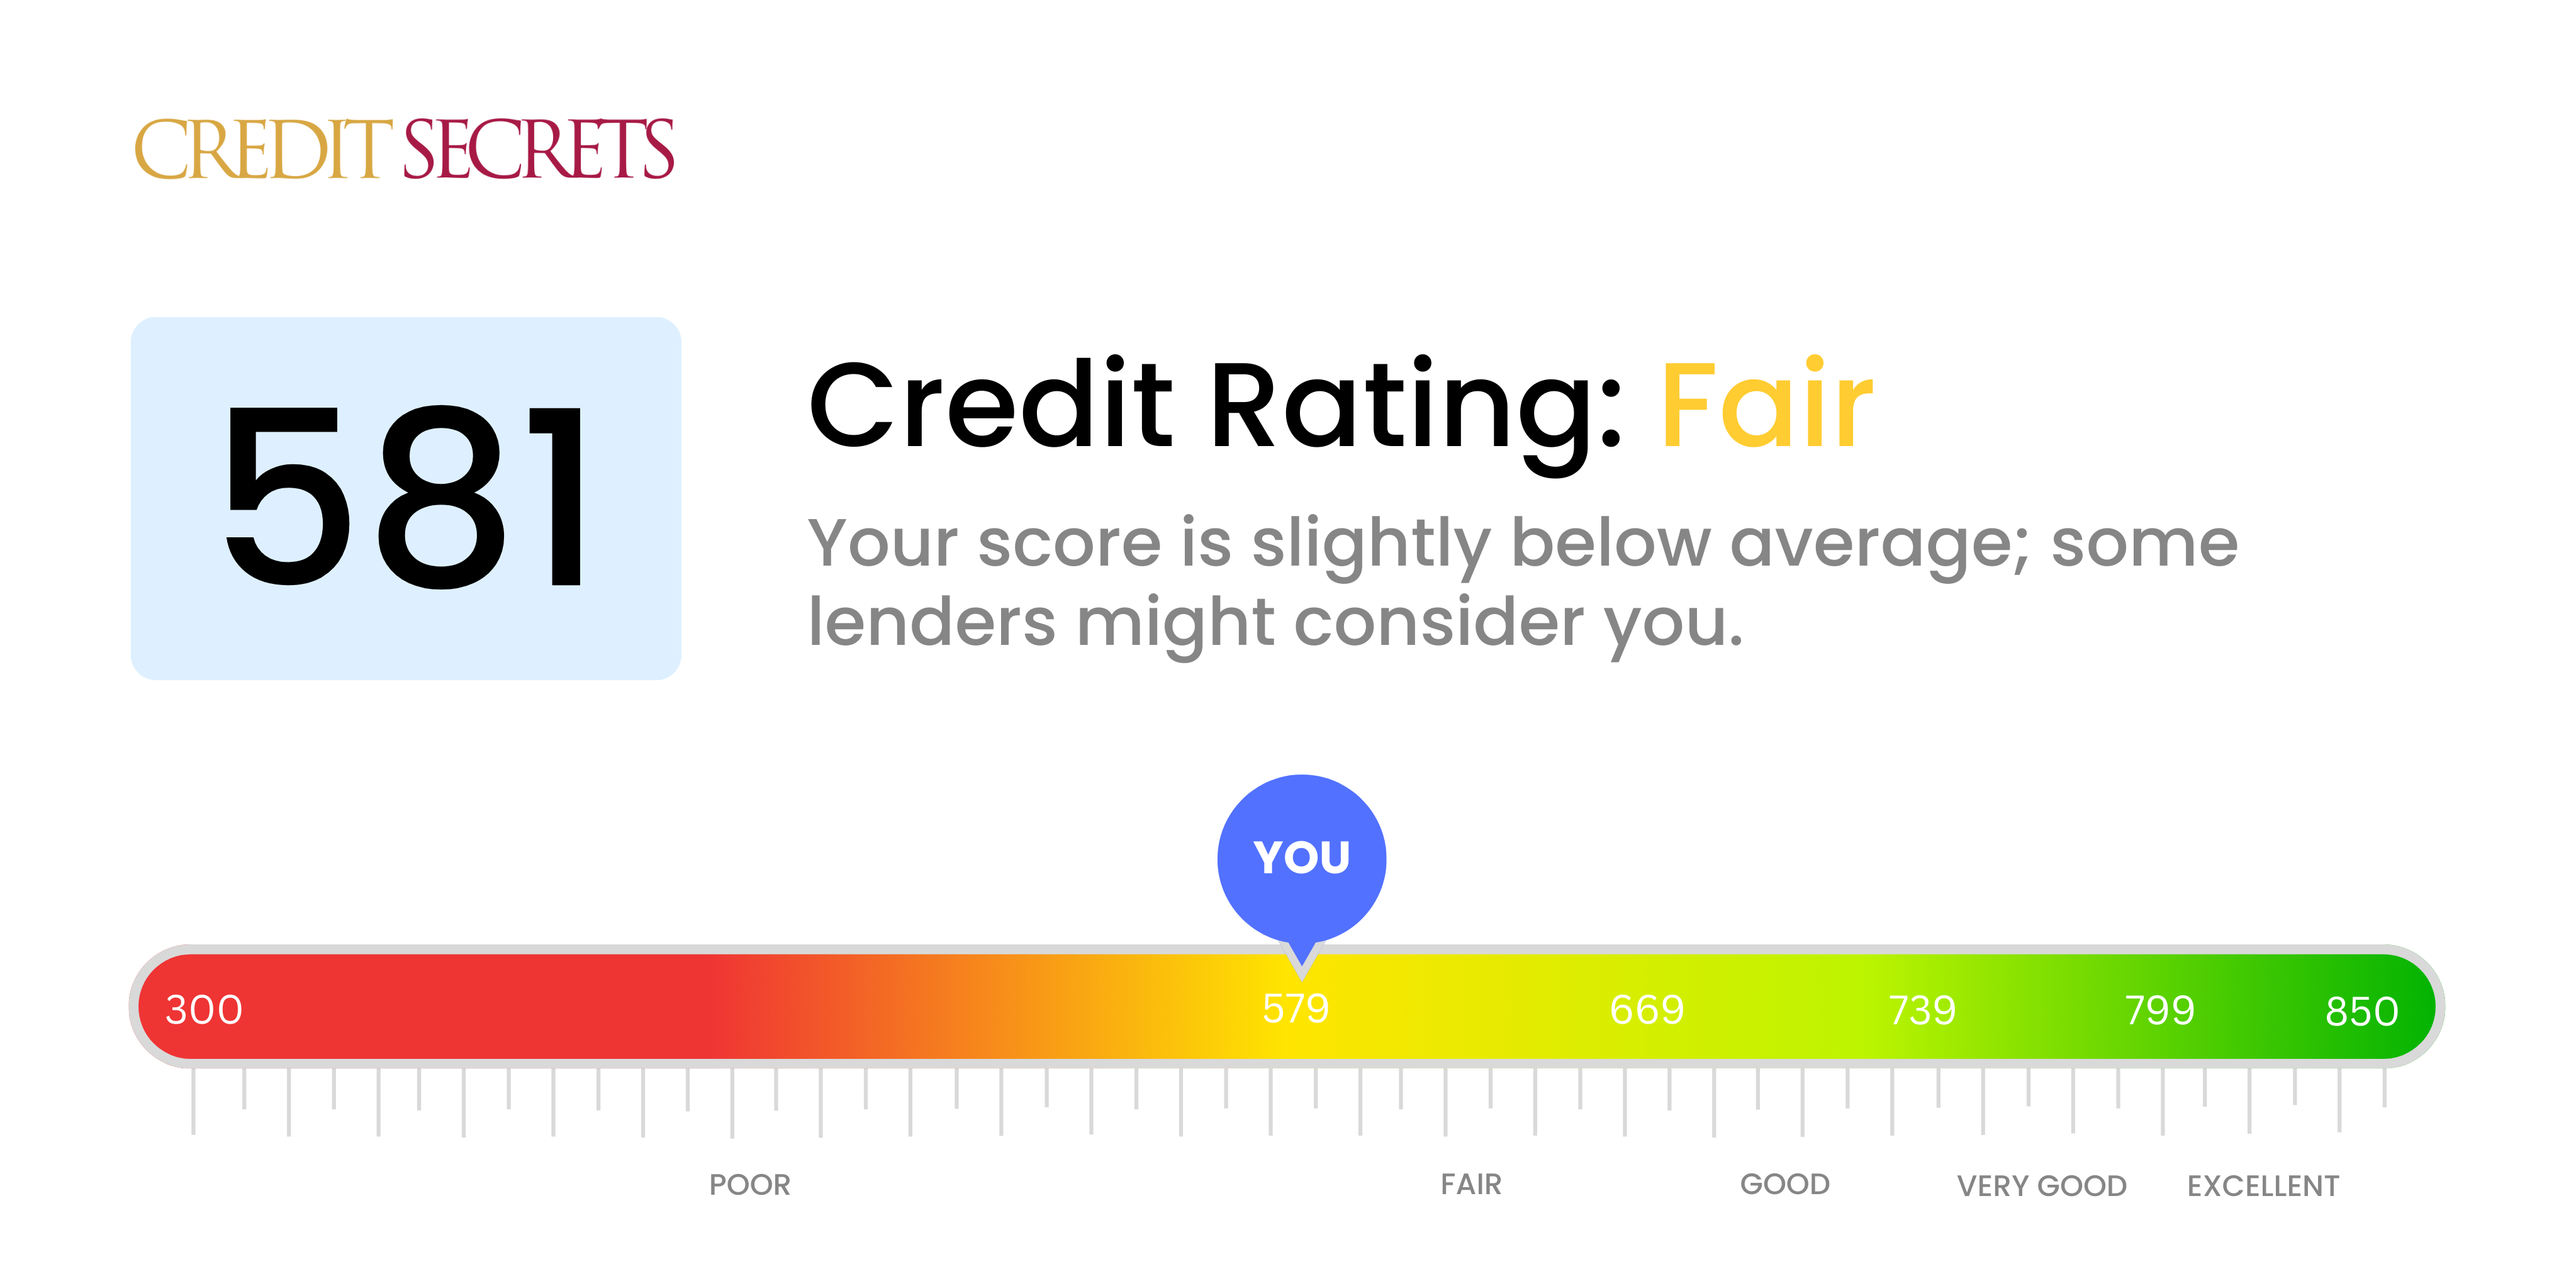 Is 581 a good credit score?